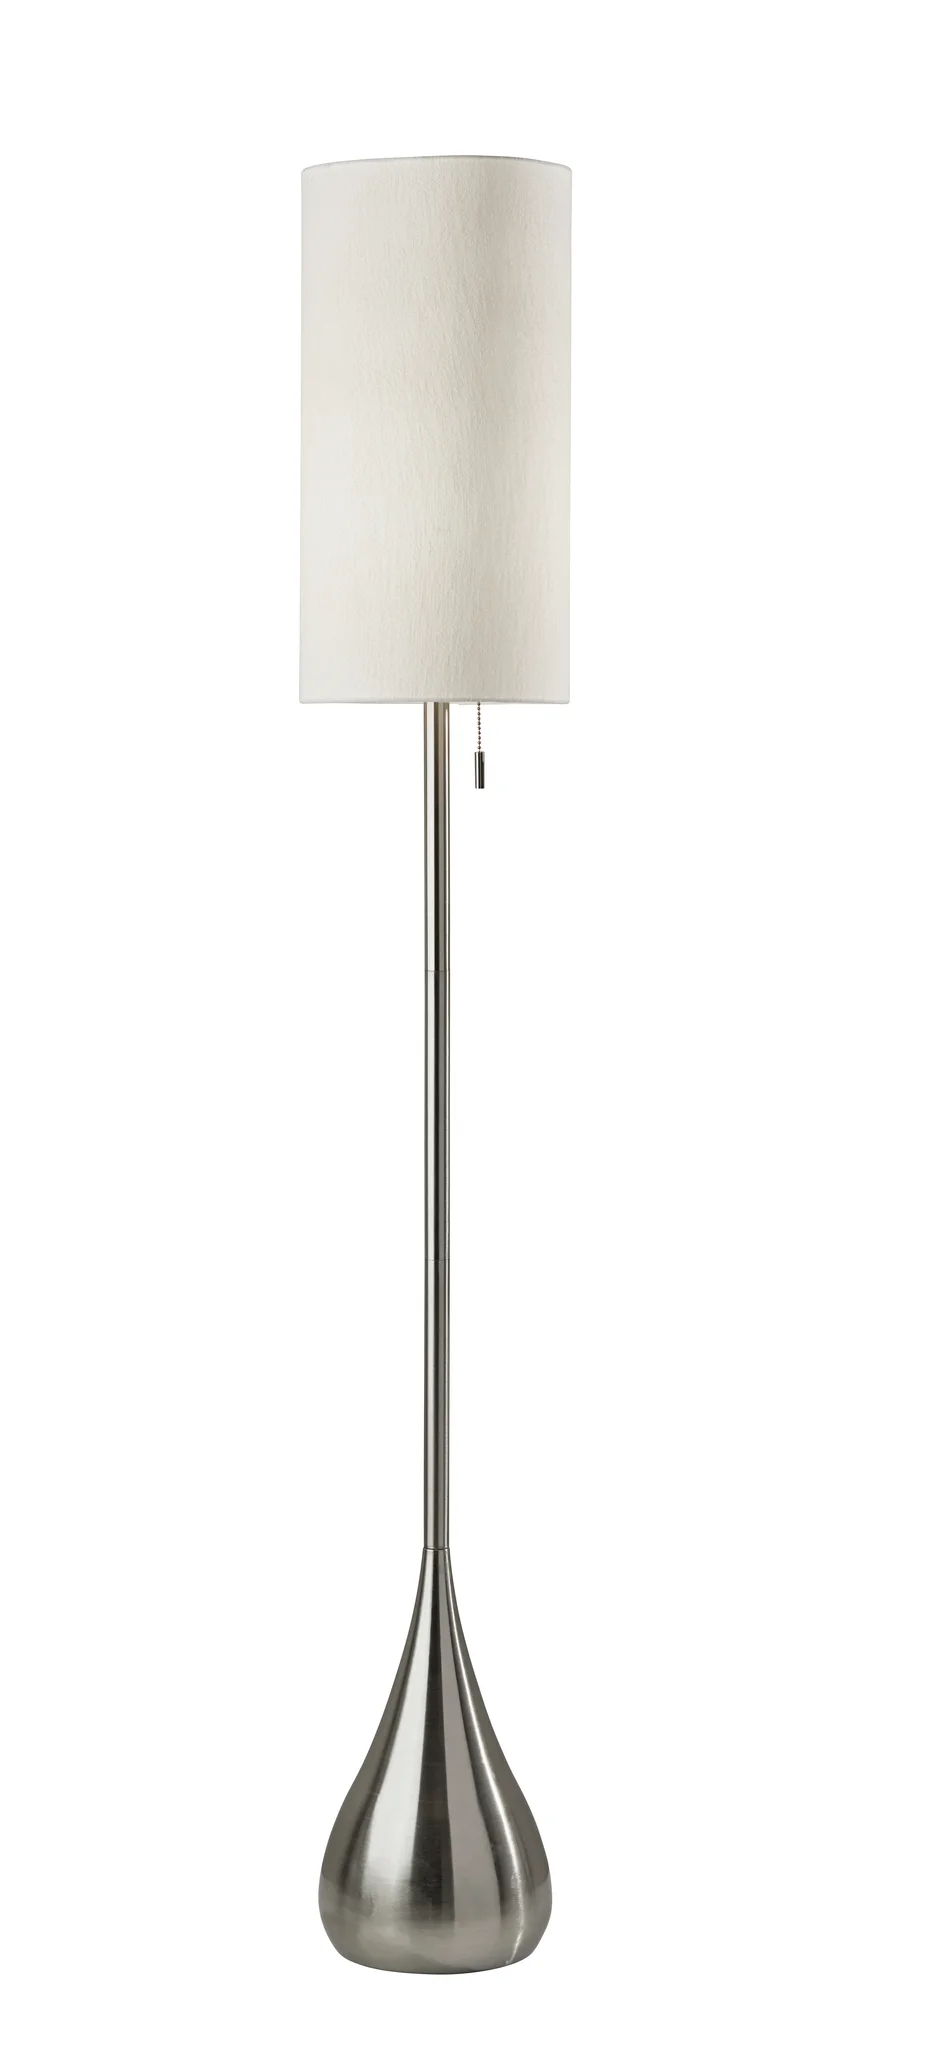 68" Traditional Shaped Floor Lamp With White Drum Shade